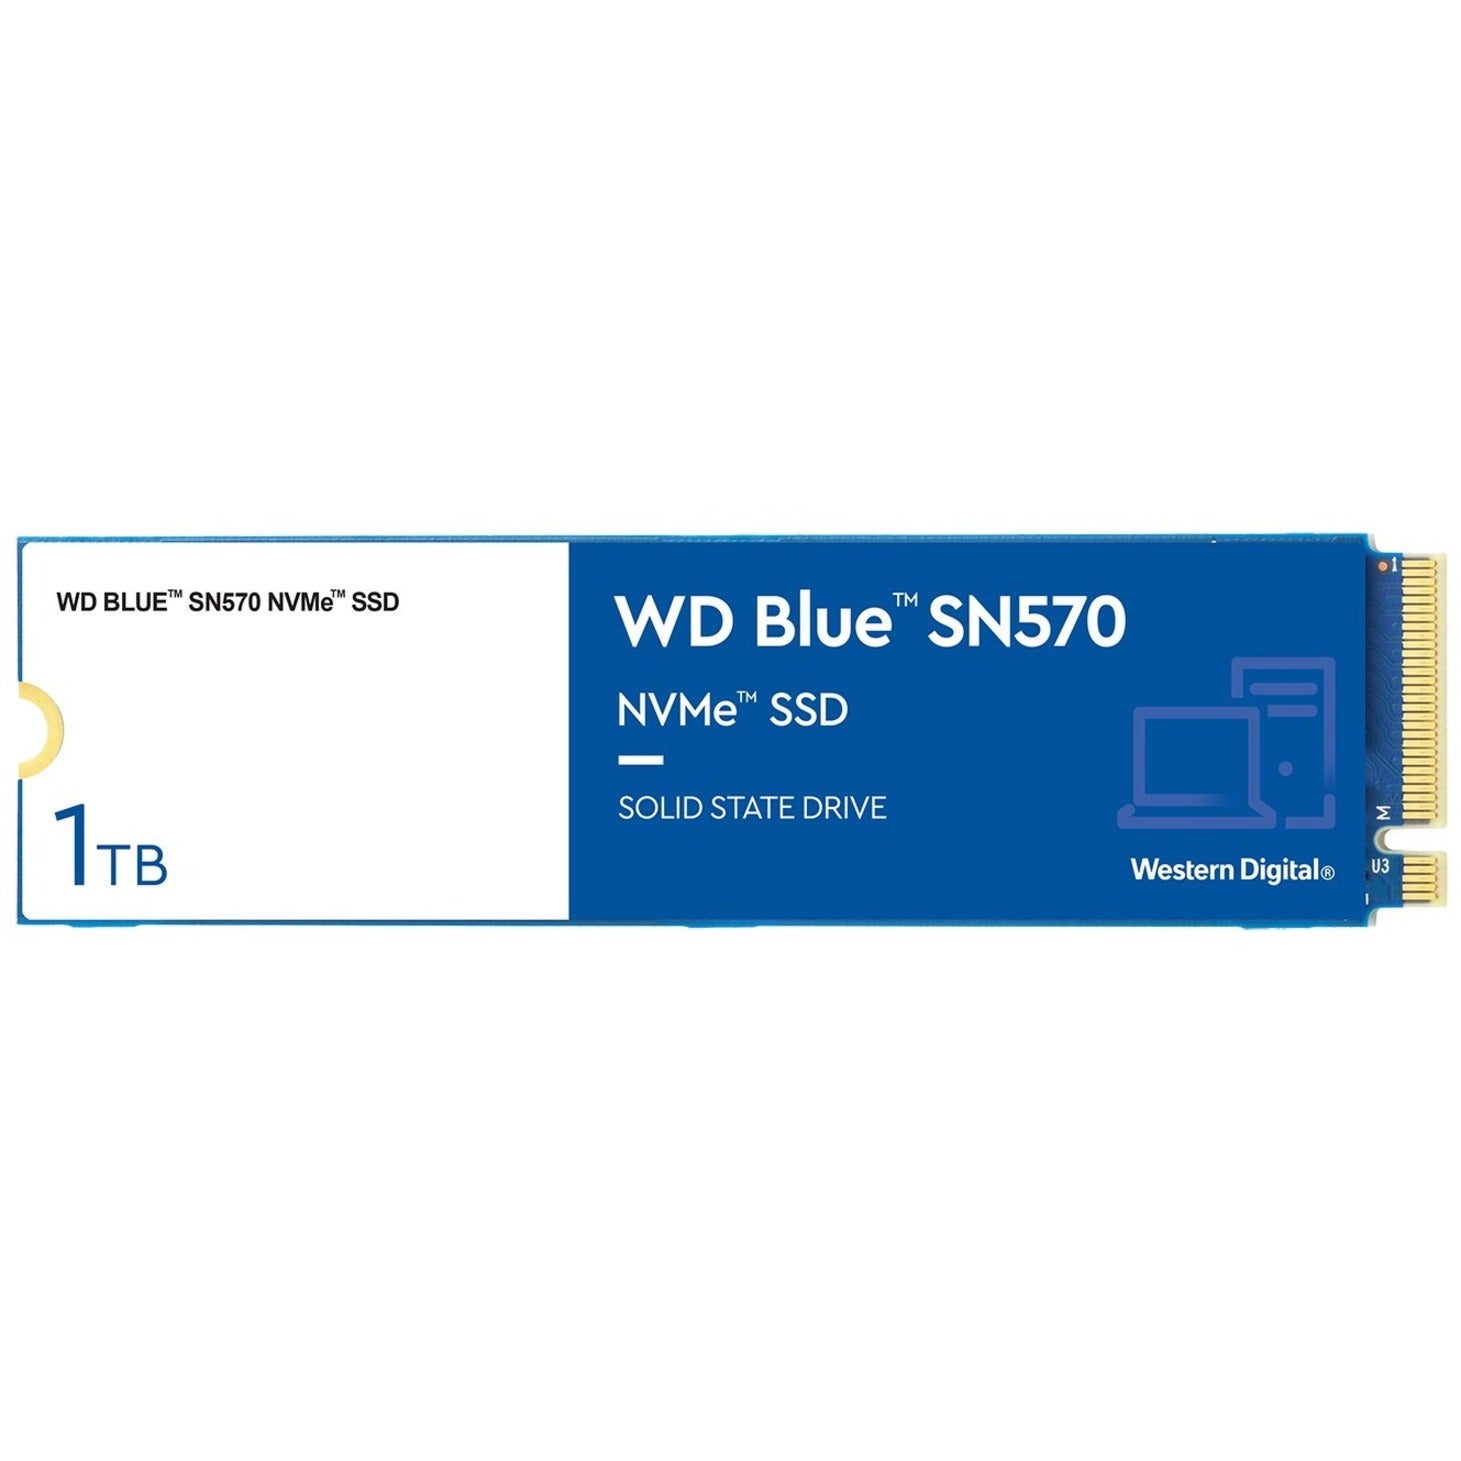 Western Digital Blue SN570 NVMe SSD - 1TB Solid State Drive [Discontinued]